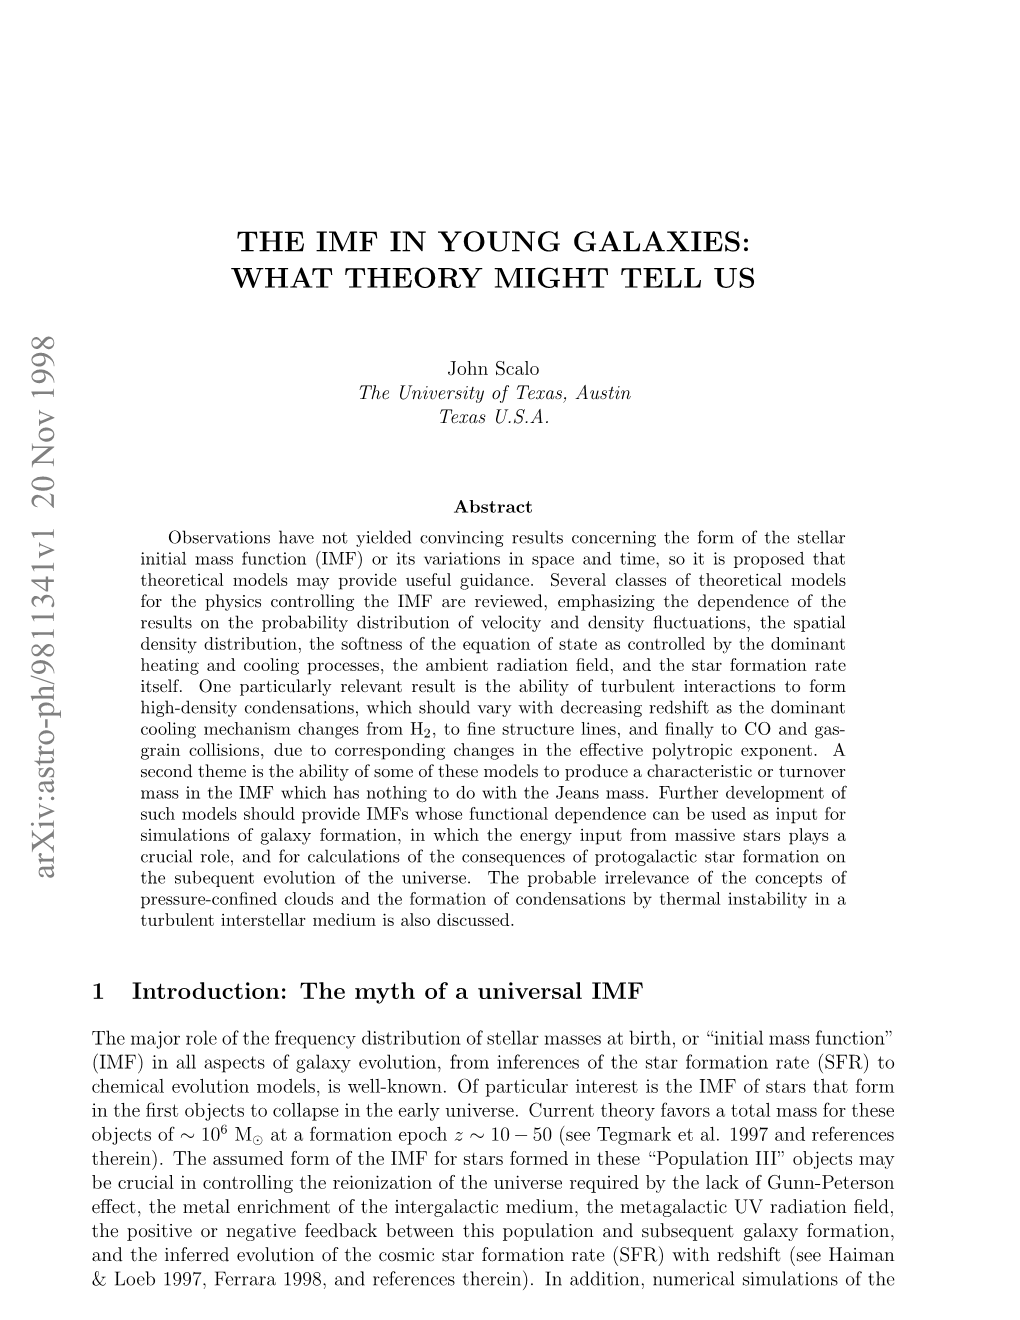 The IMF in Young Galaxies: What Theory Might Tell Us